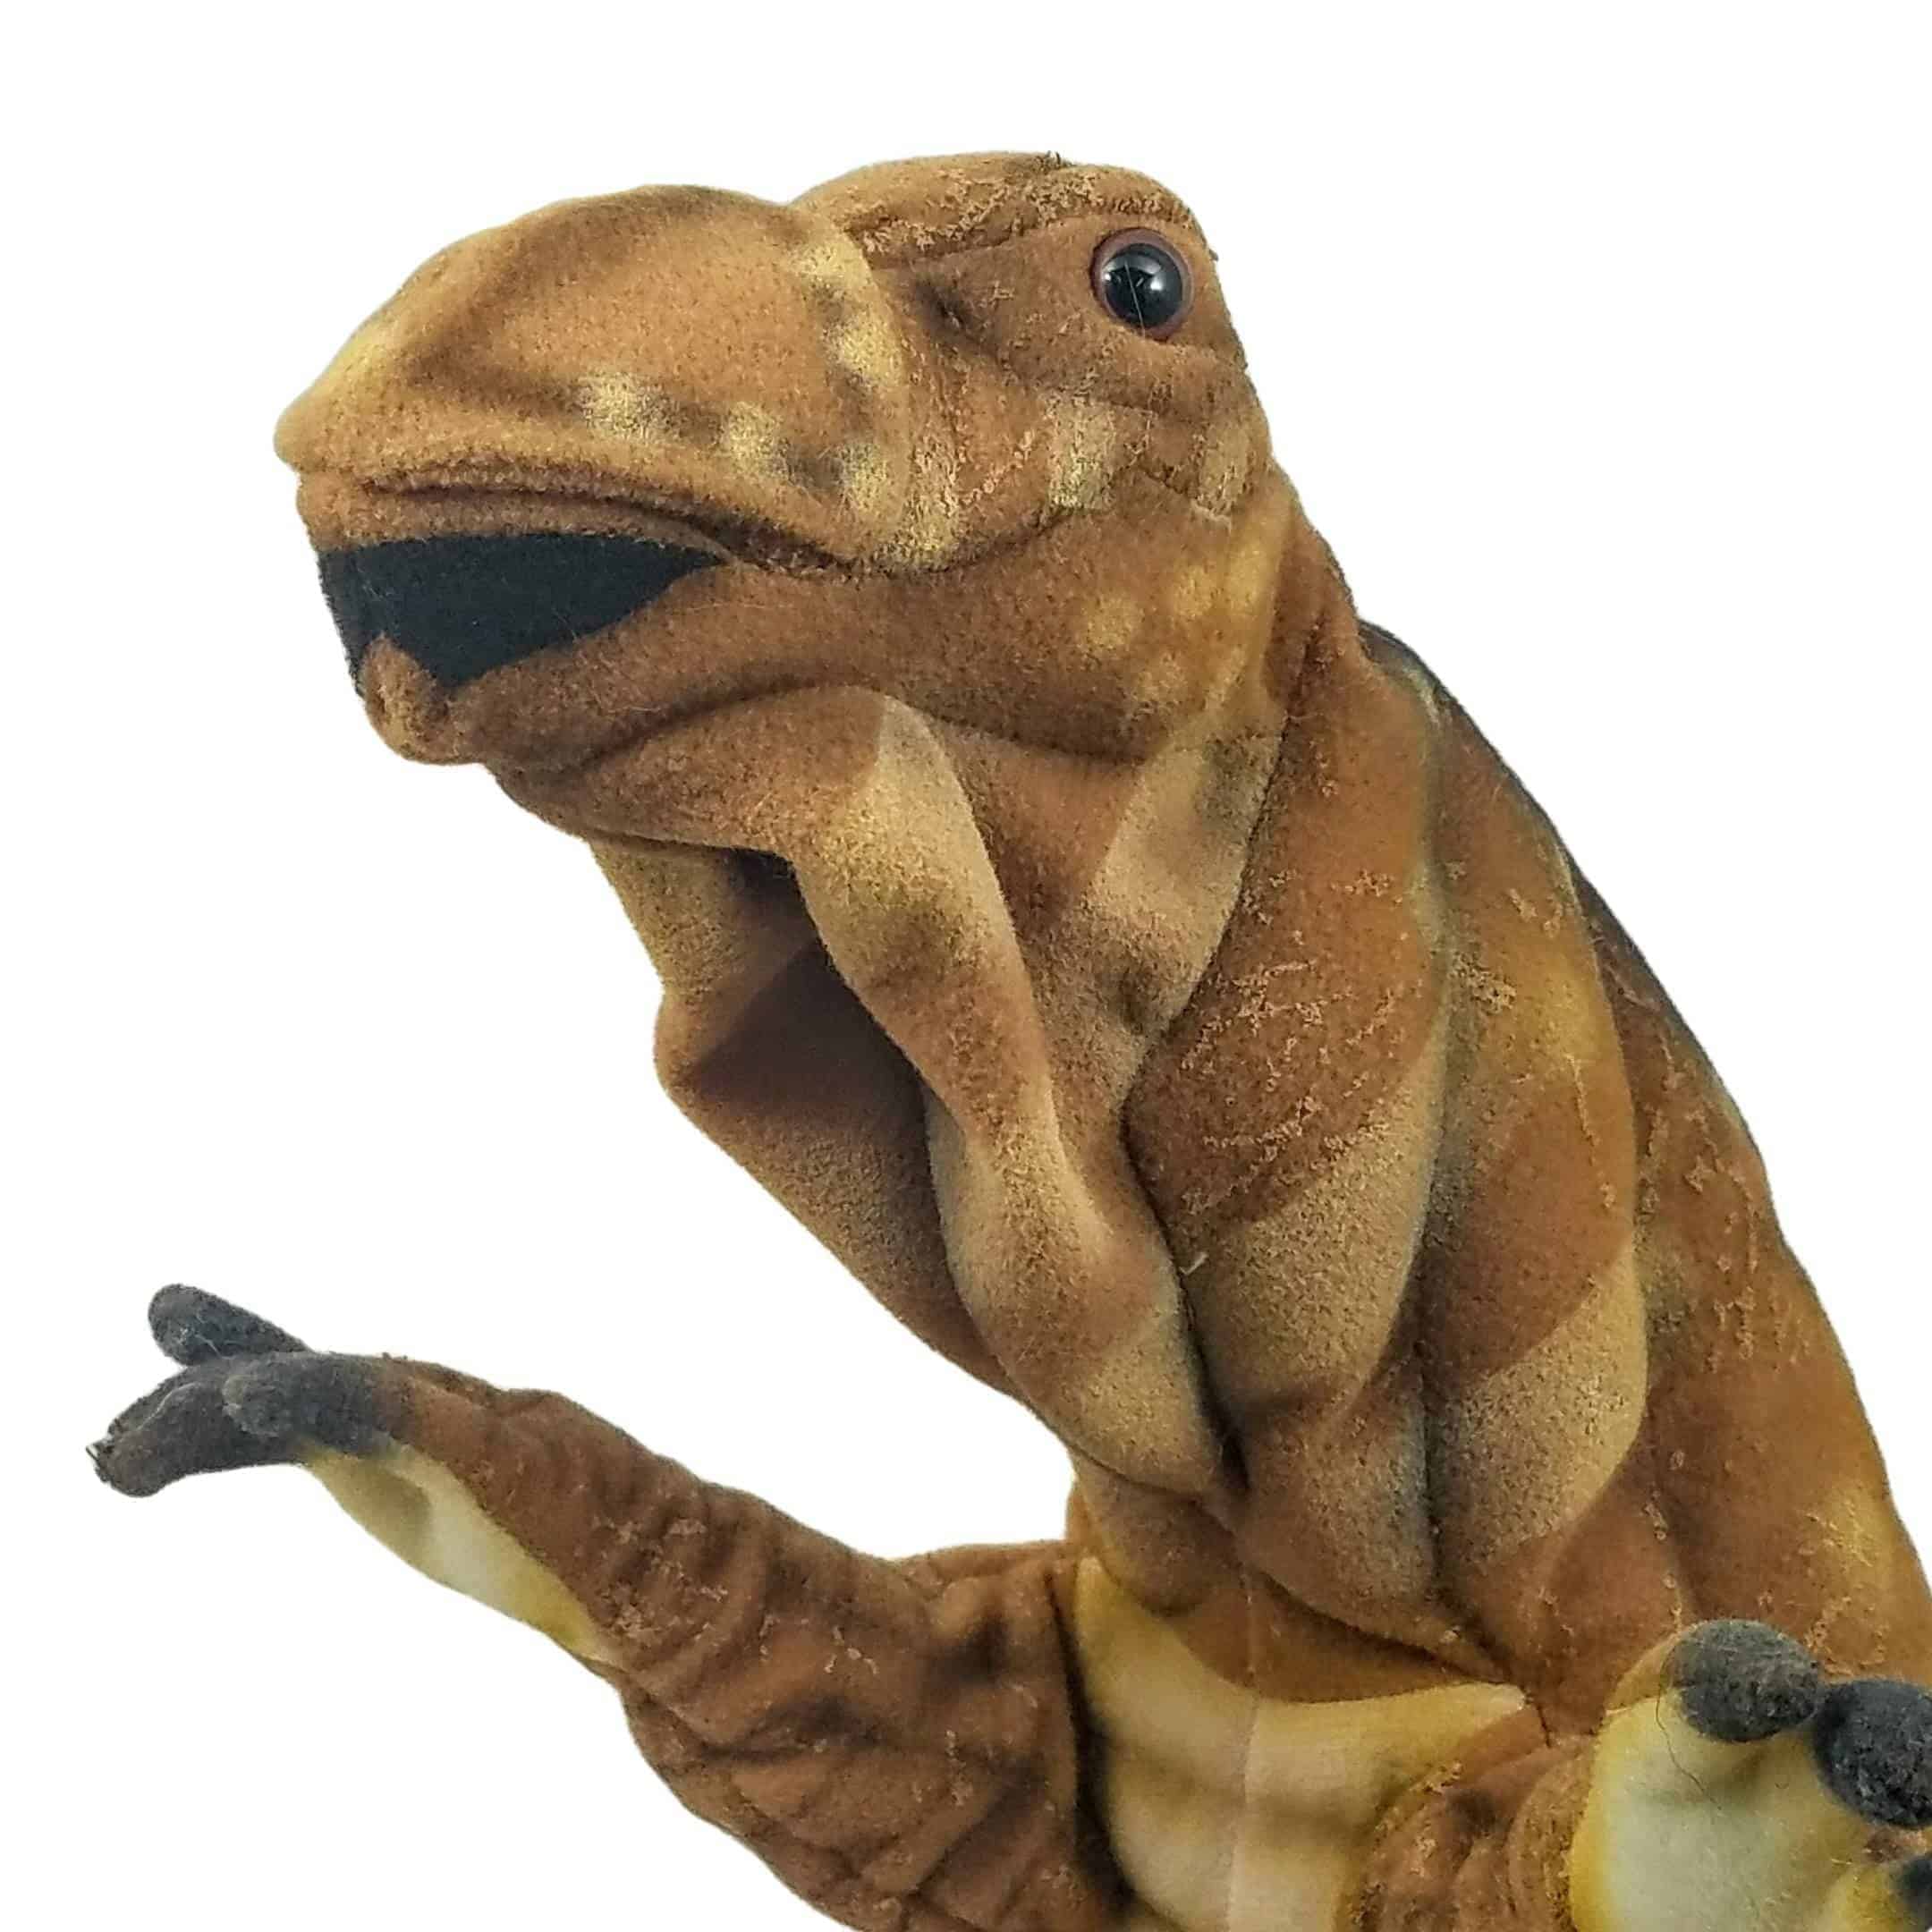 This Muttaburasaurus Dinosaur Hand Puppet by Hansa True to Life Looking Plush Learning Toys is made with love by Premier Homegoods! Shop more unique gift ideas today with Spots Initiatives, the best way to support creators.